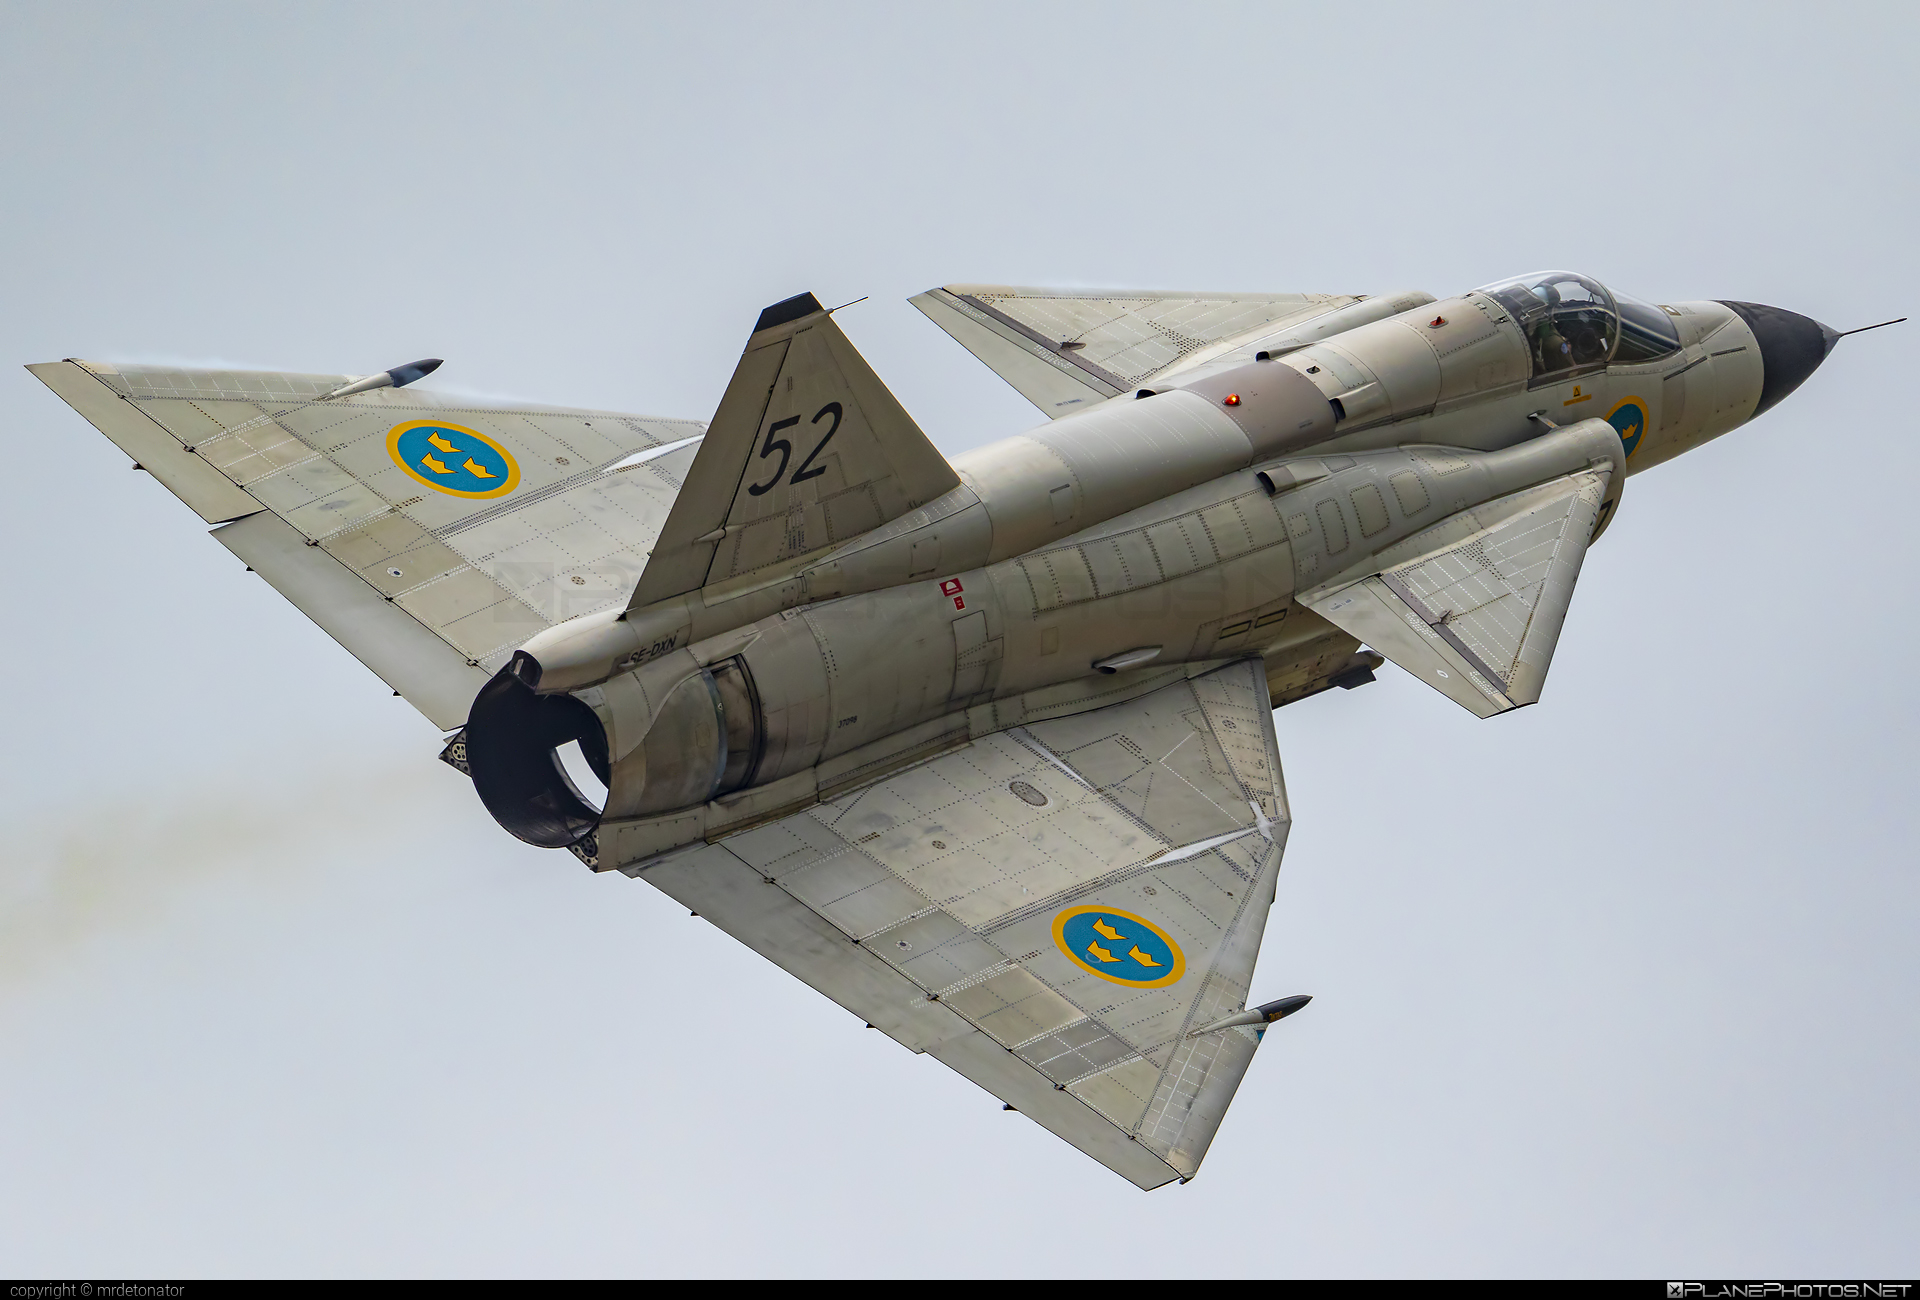 Saab AJSF 37 Viggen - SE-DXN operated by Swedish Air Force Historic Flight #ajsf37 #ajsf37viggen #dnynato2021 #natodays2021 #saab #saab37 #saabajsf37 #saabajsf37viggen #saabviggen #viggen